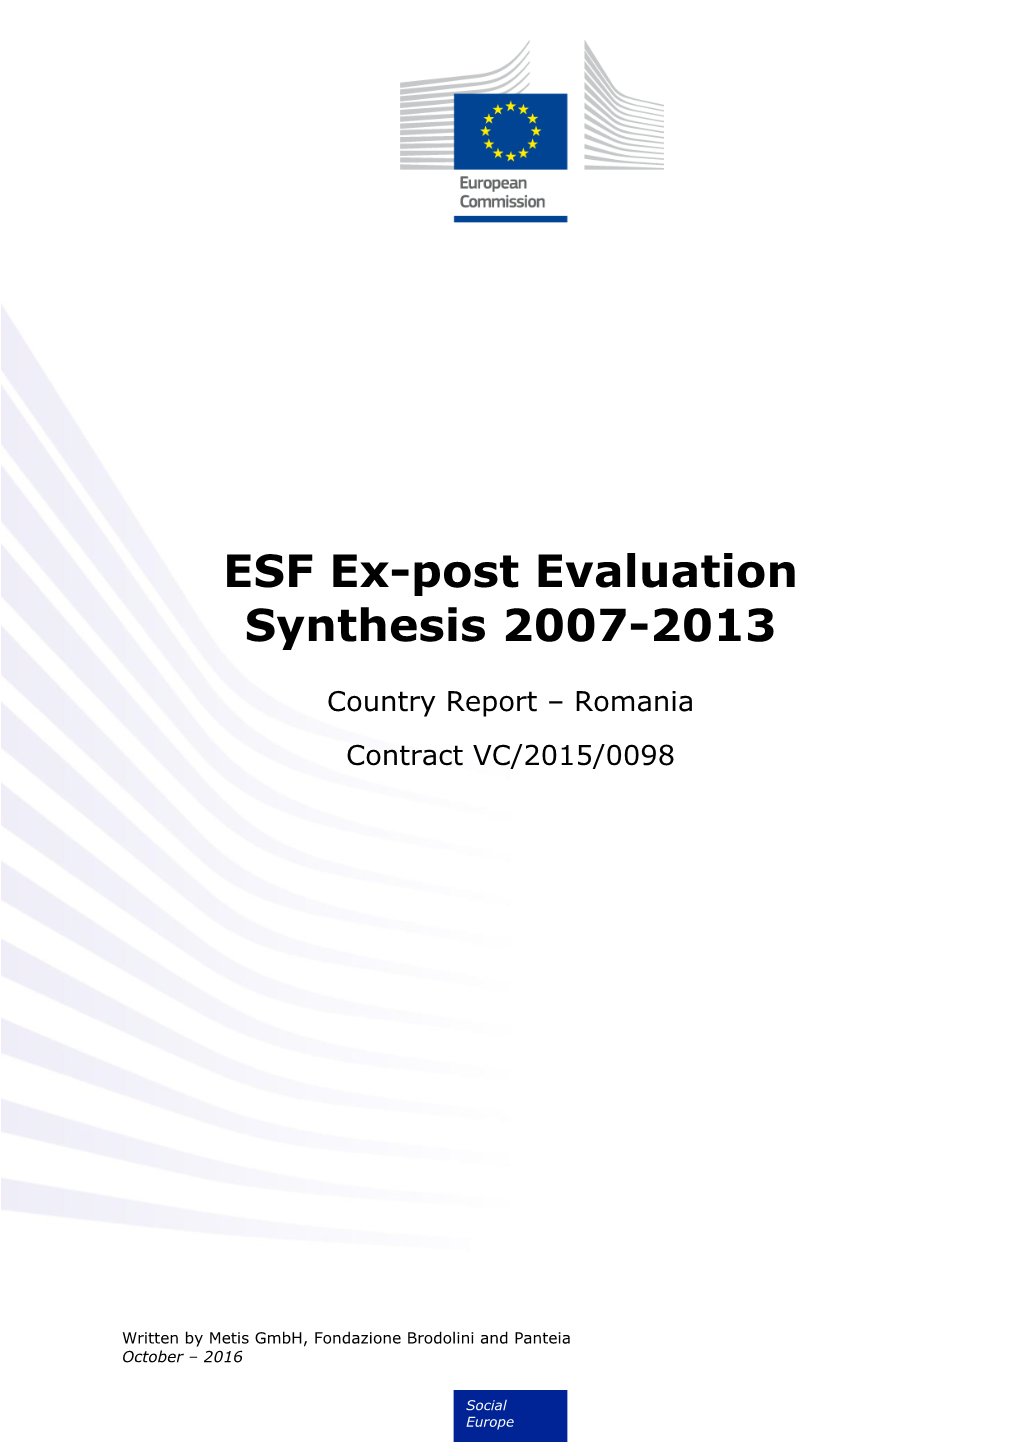 ESF Ex-Post Evaluation Synthesis 2007-2013 Country Report – Romania